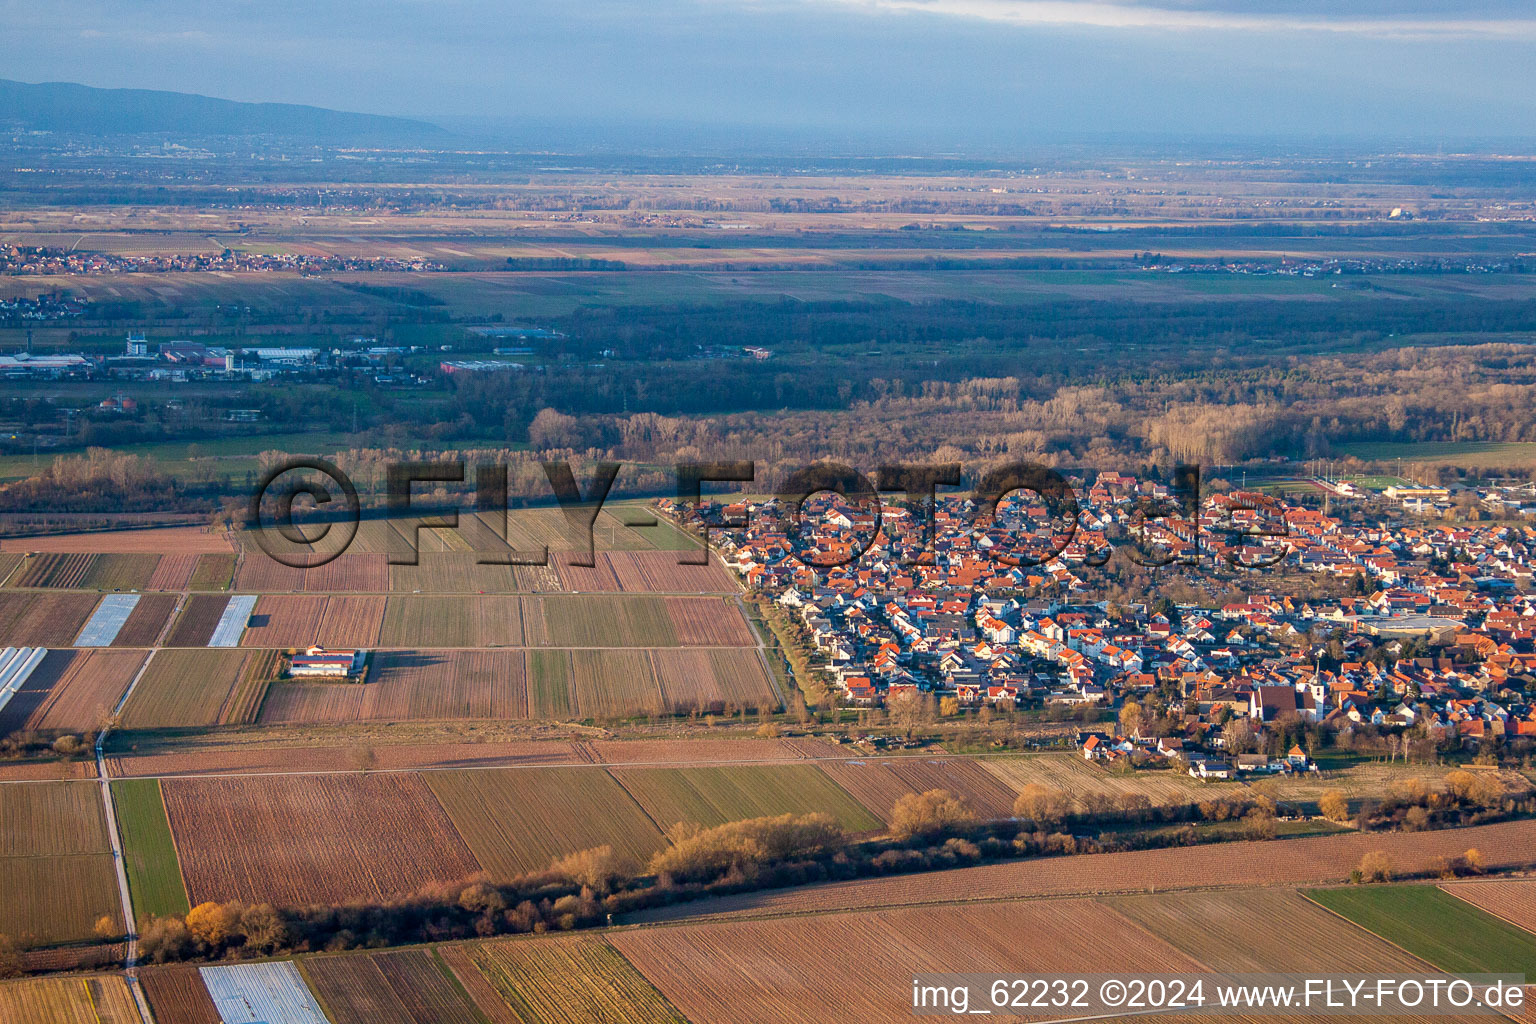 Offenbach an der Queich in the state Rhineland-Palatinate, Germany seen from above